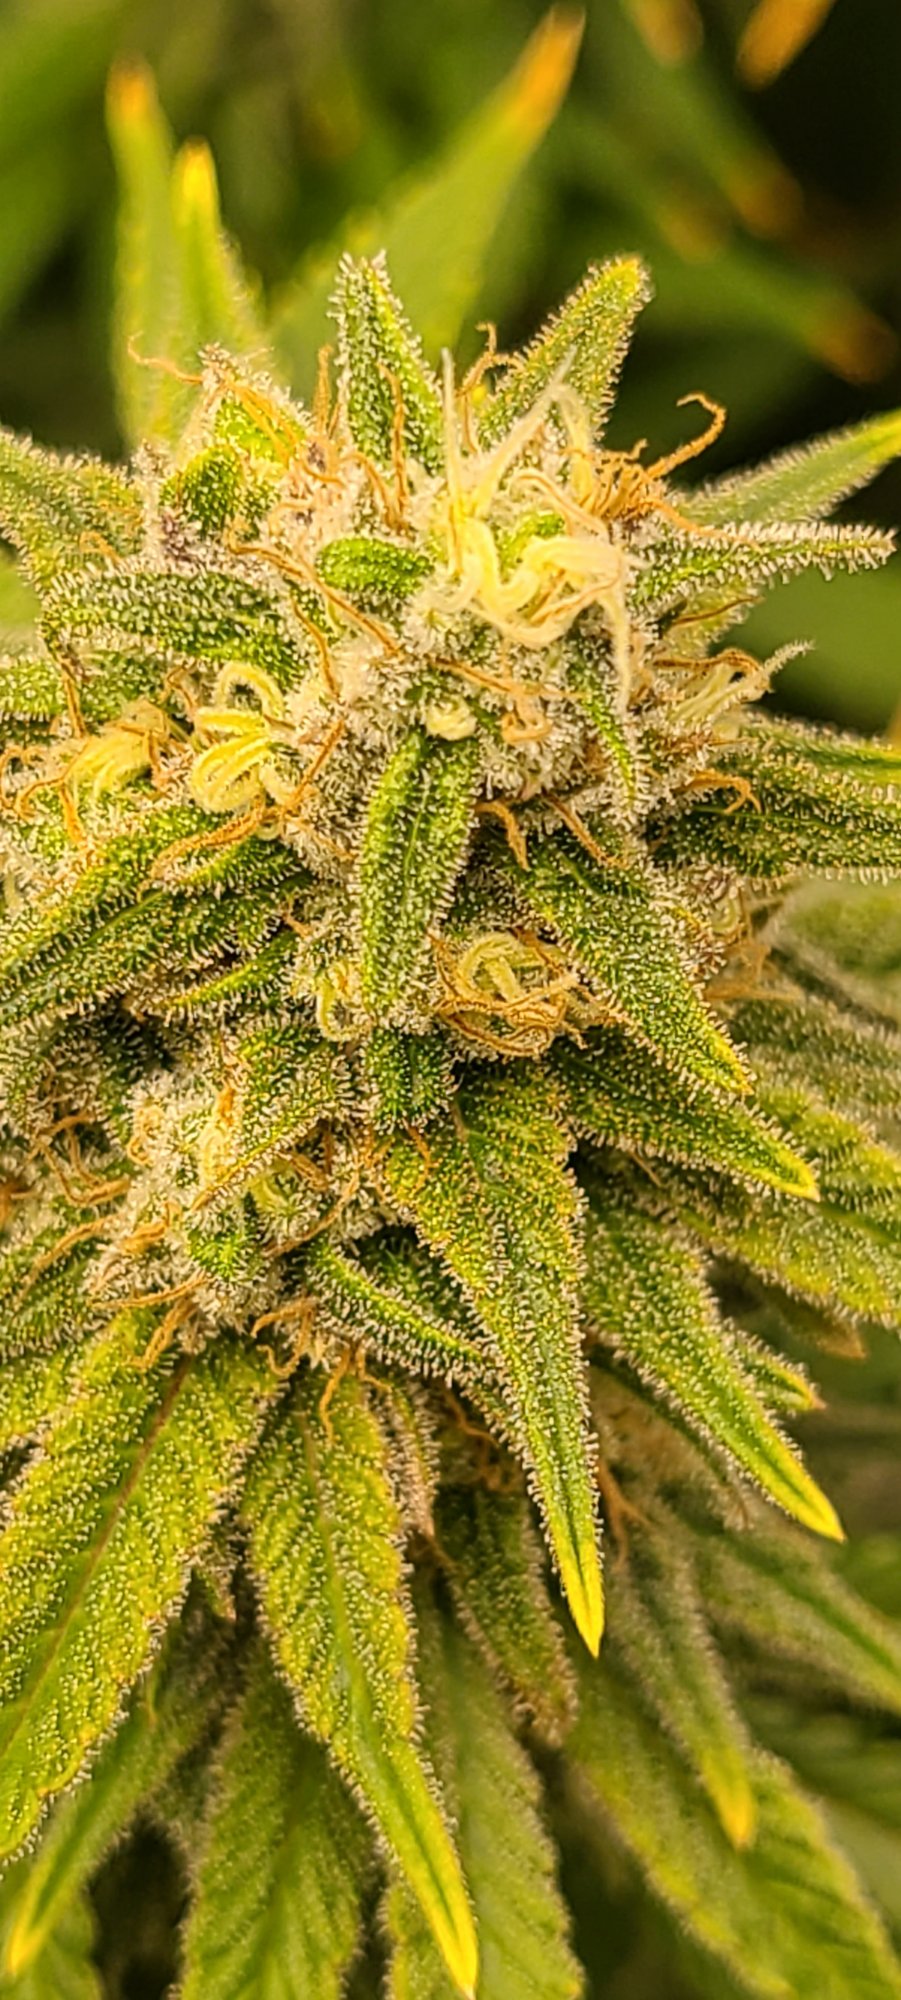 Harvest help for a newbie please 3